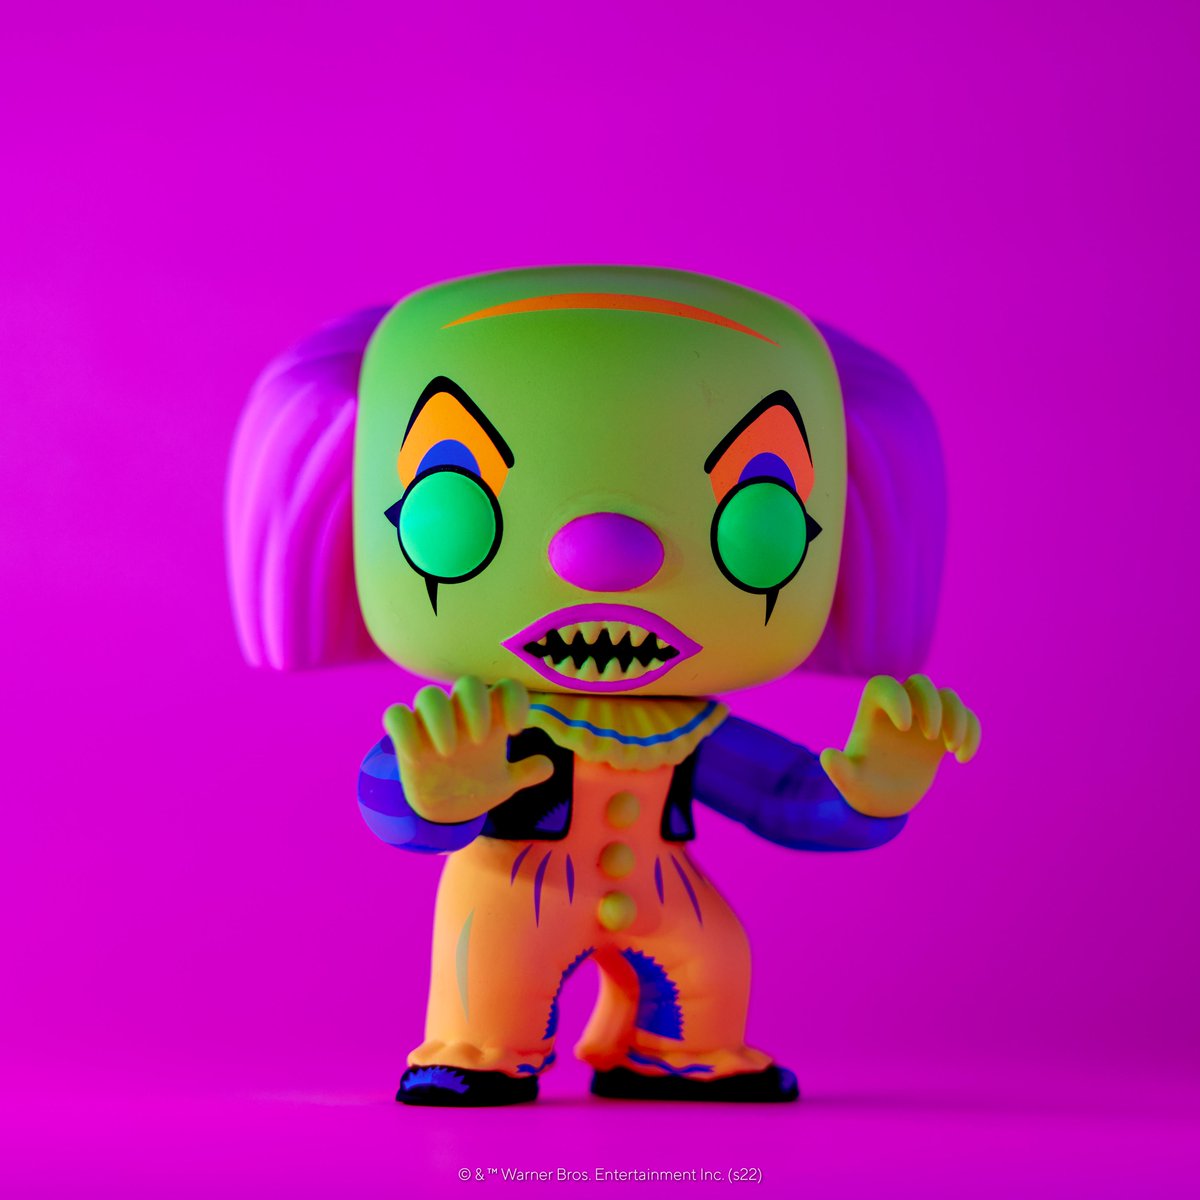 Today is the fifteen day of our October Instagram #FunkoPhotoADayChallenge! The theme for today is Spooky Blacklight! Head to our Instagram to participate! #Funko